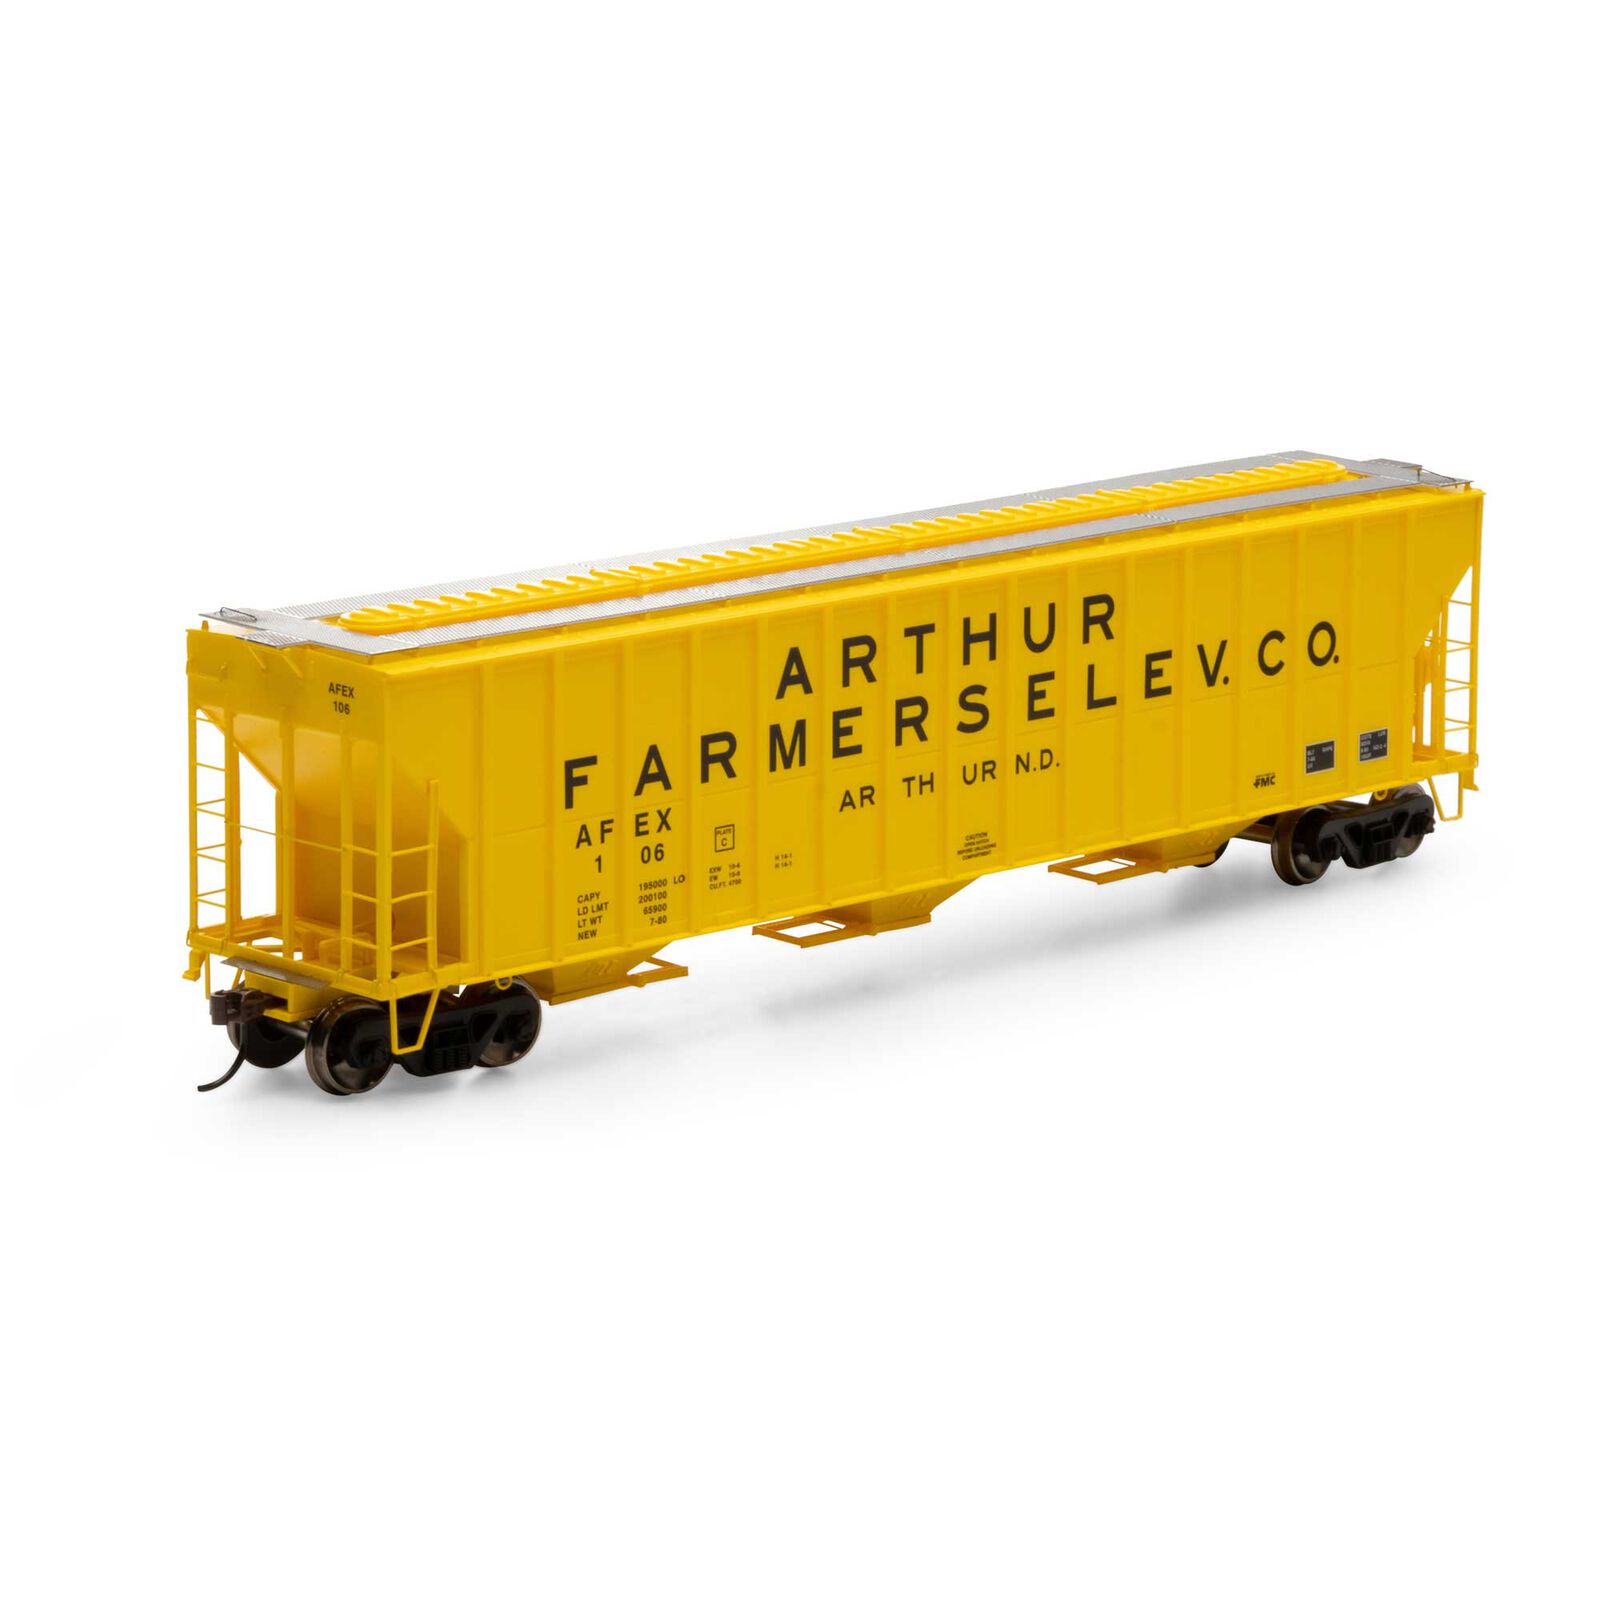 Athearn RTR 81577 - HO FMC 4700 Covered Hopper - AFEX #106